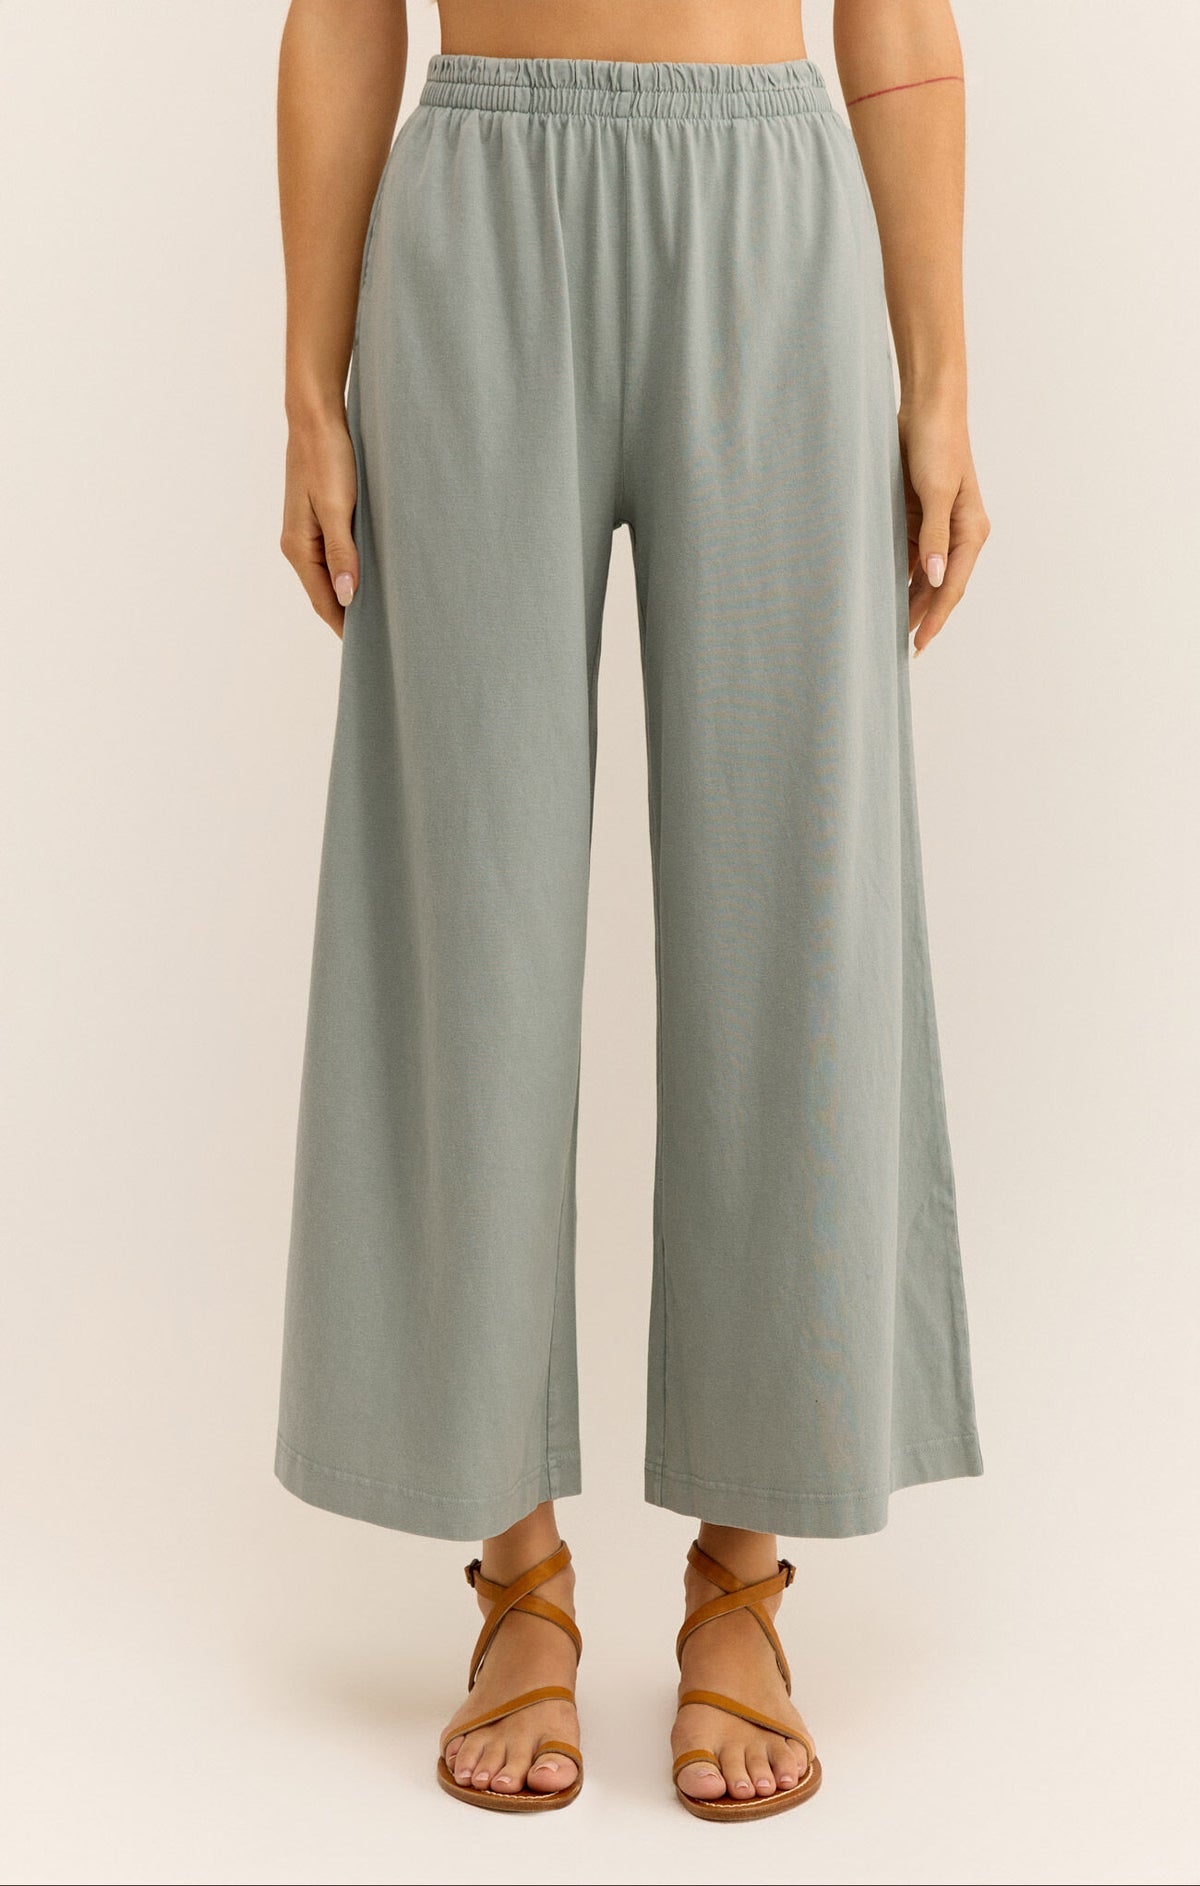 Scout Jersey Flare Pant in Harbor Gray